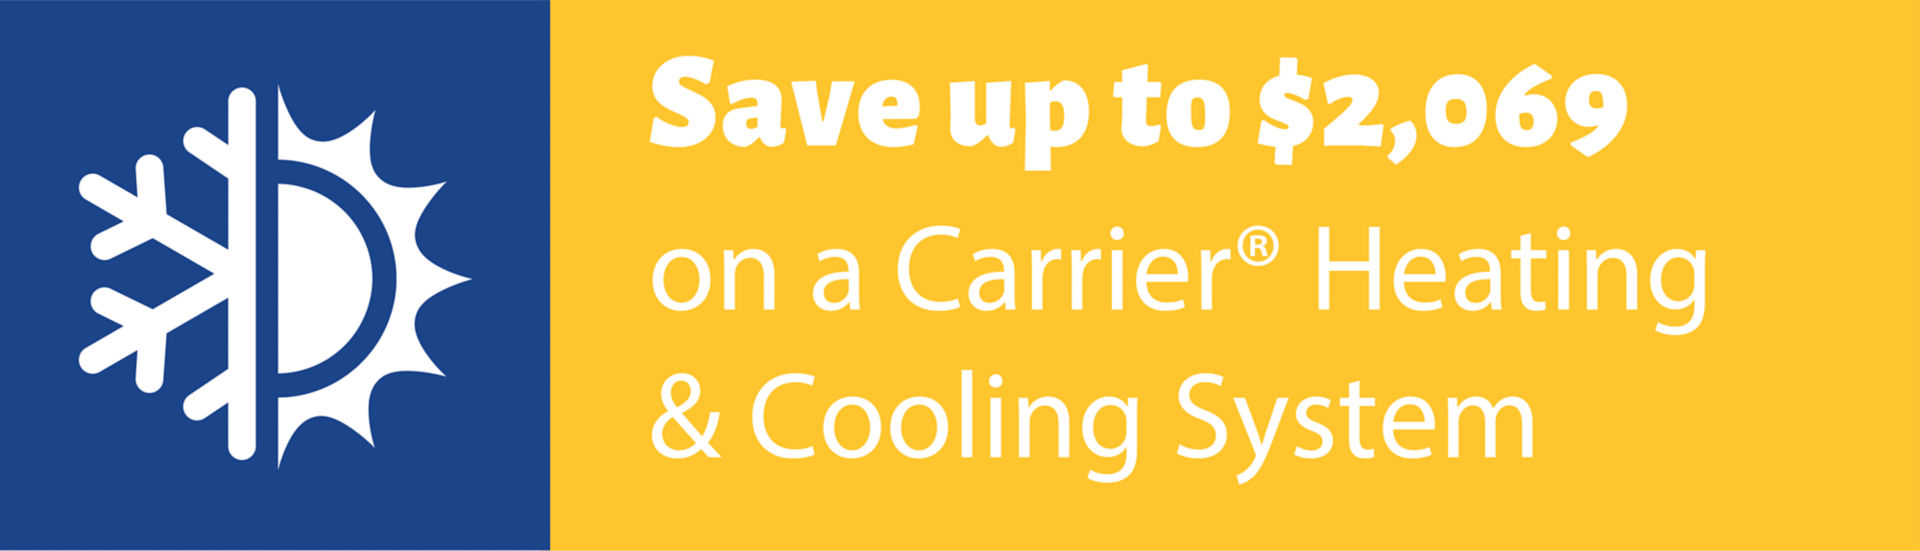 Free Carrier furnace with purchase of qualifying air conditioner.